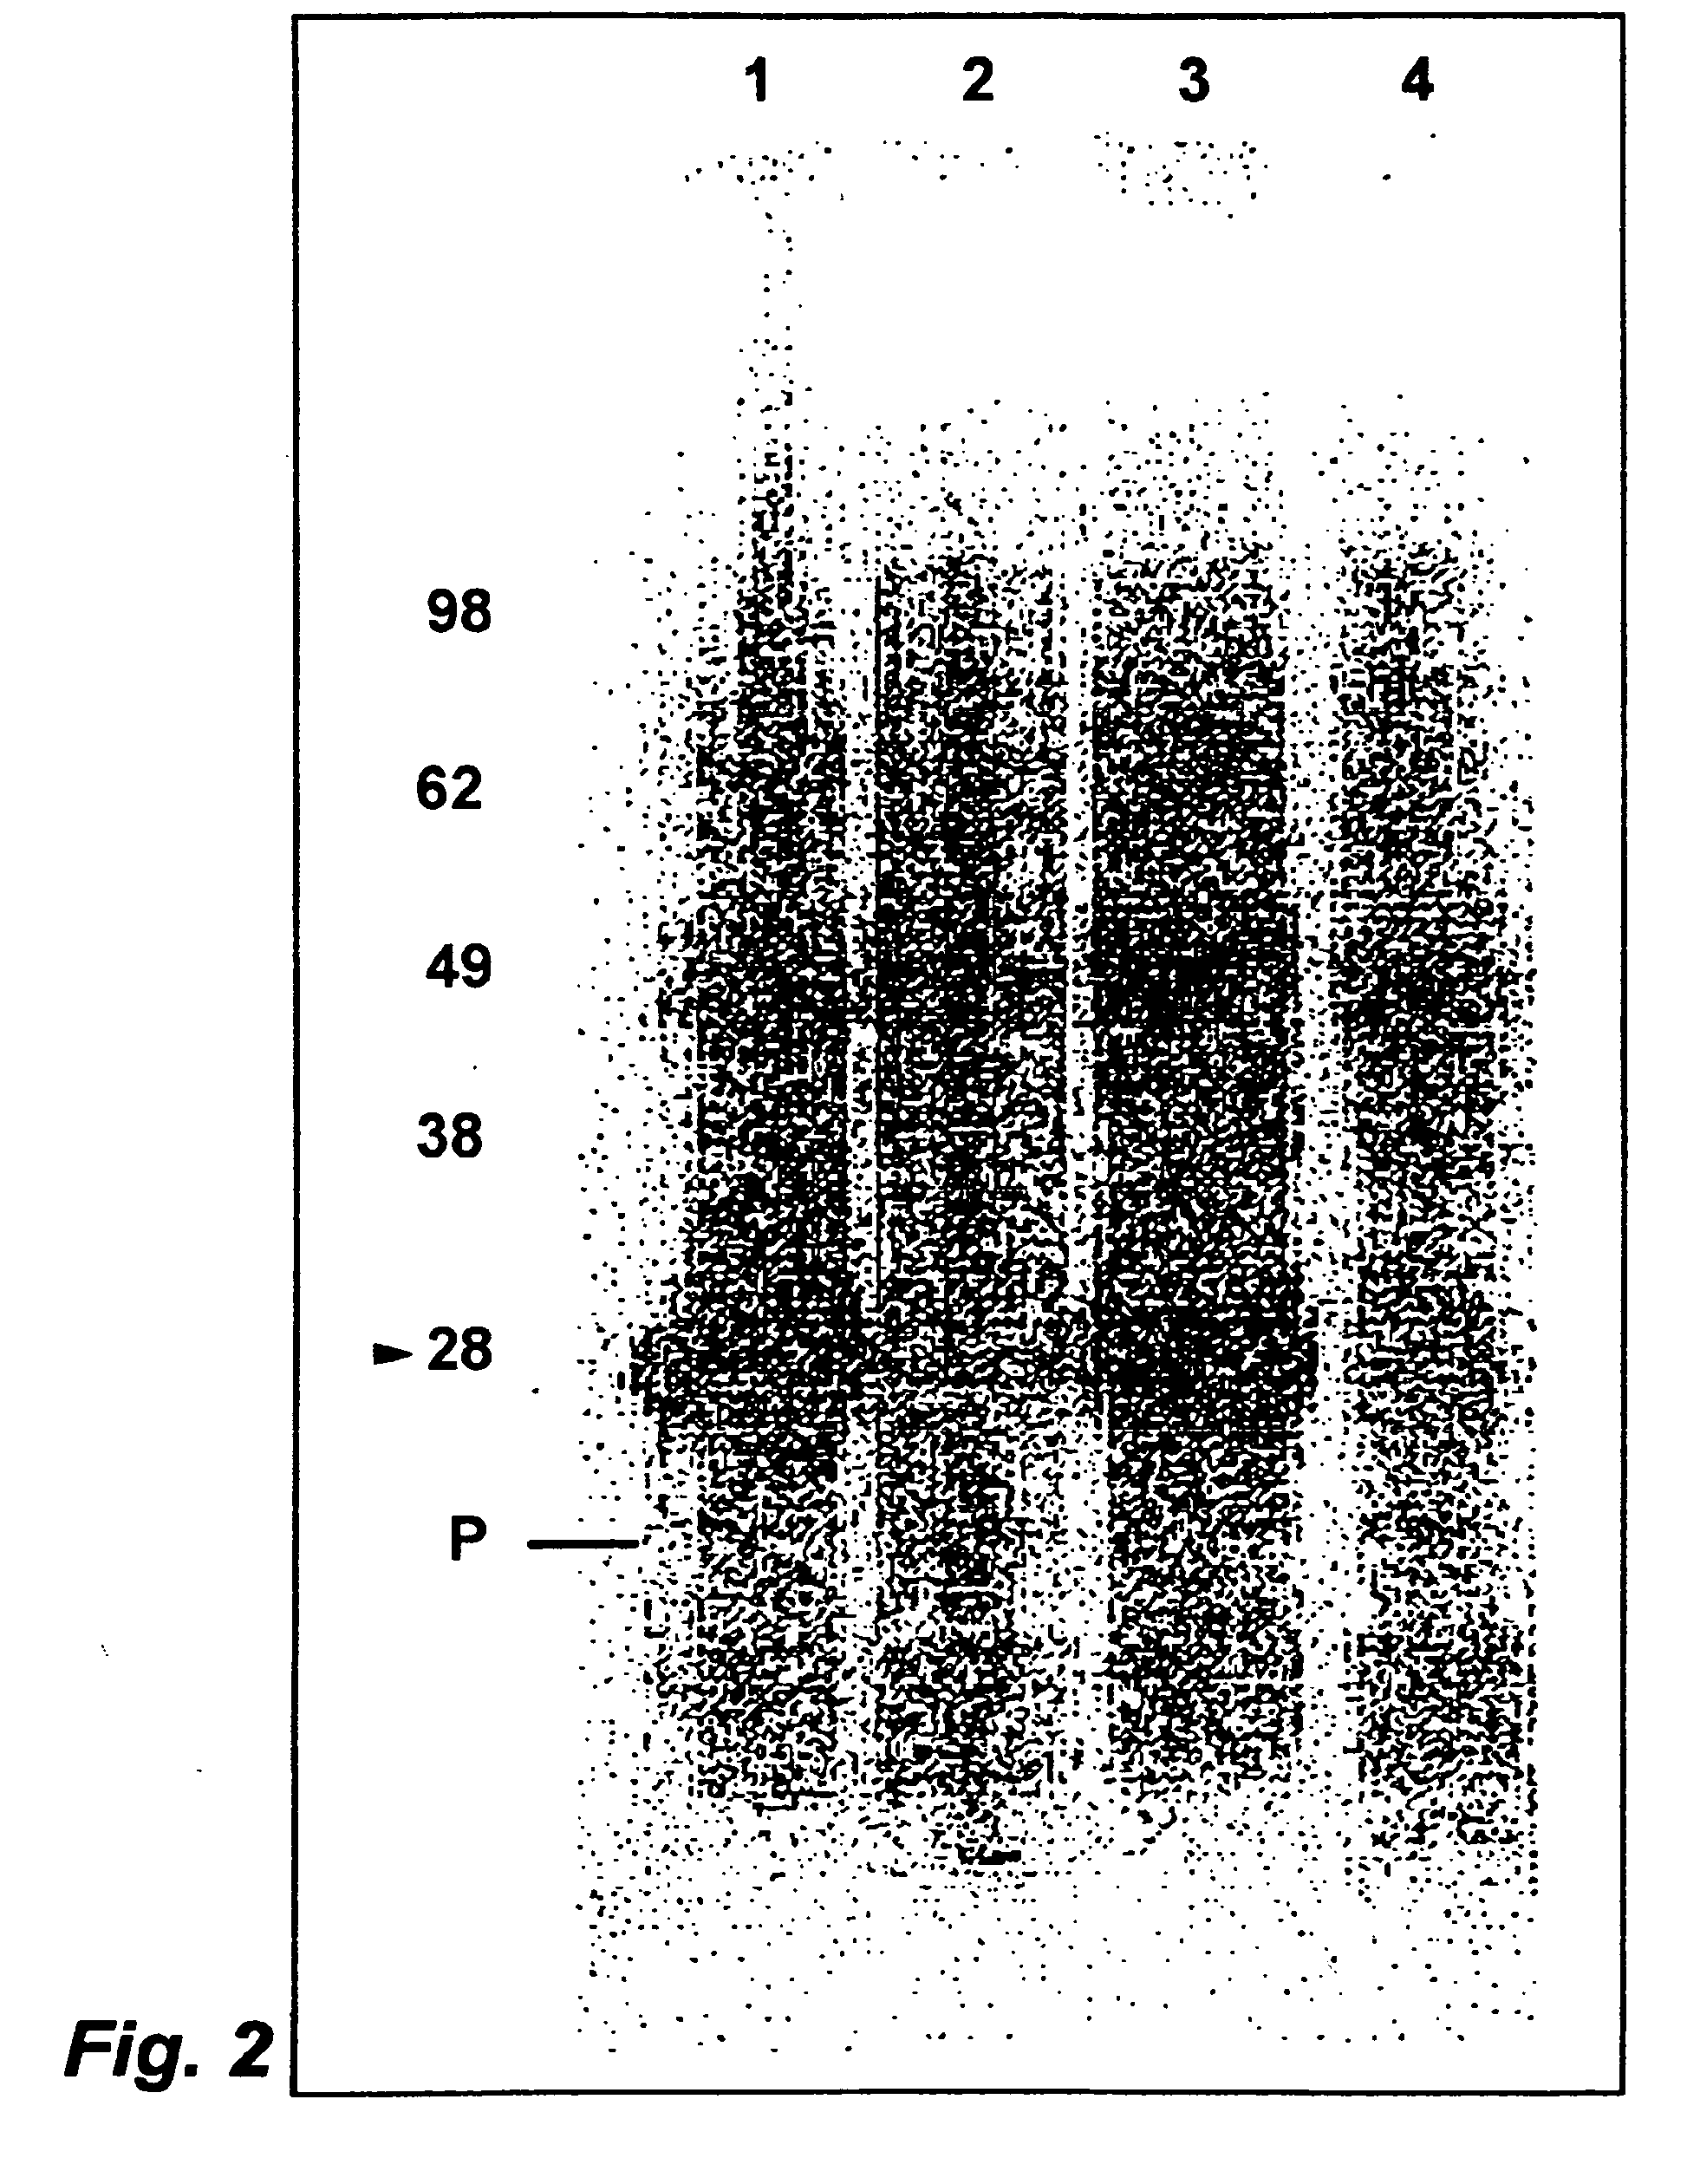 Compositions and Methods for Enhanced Somatostatin Immunogenicity in the Treatment of Growth Hormone and Insulin-Like Growth Factor One Deficiency